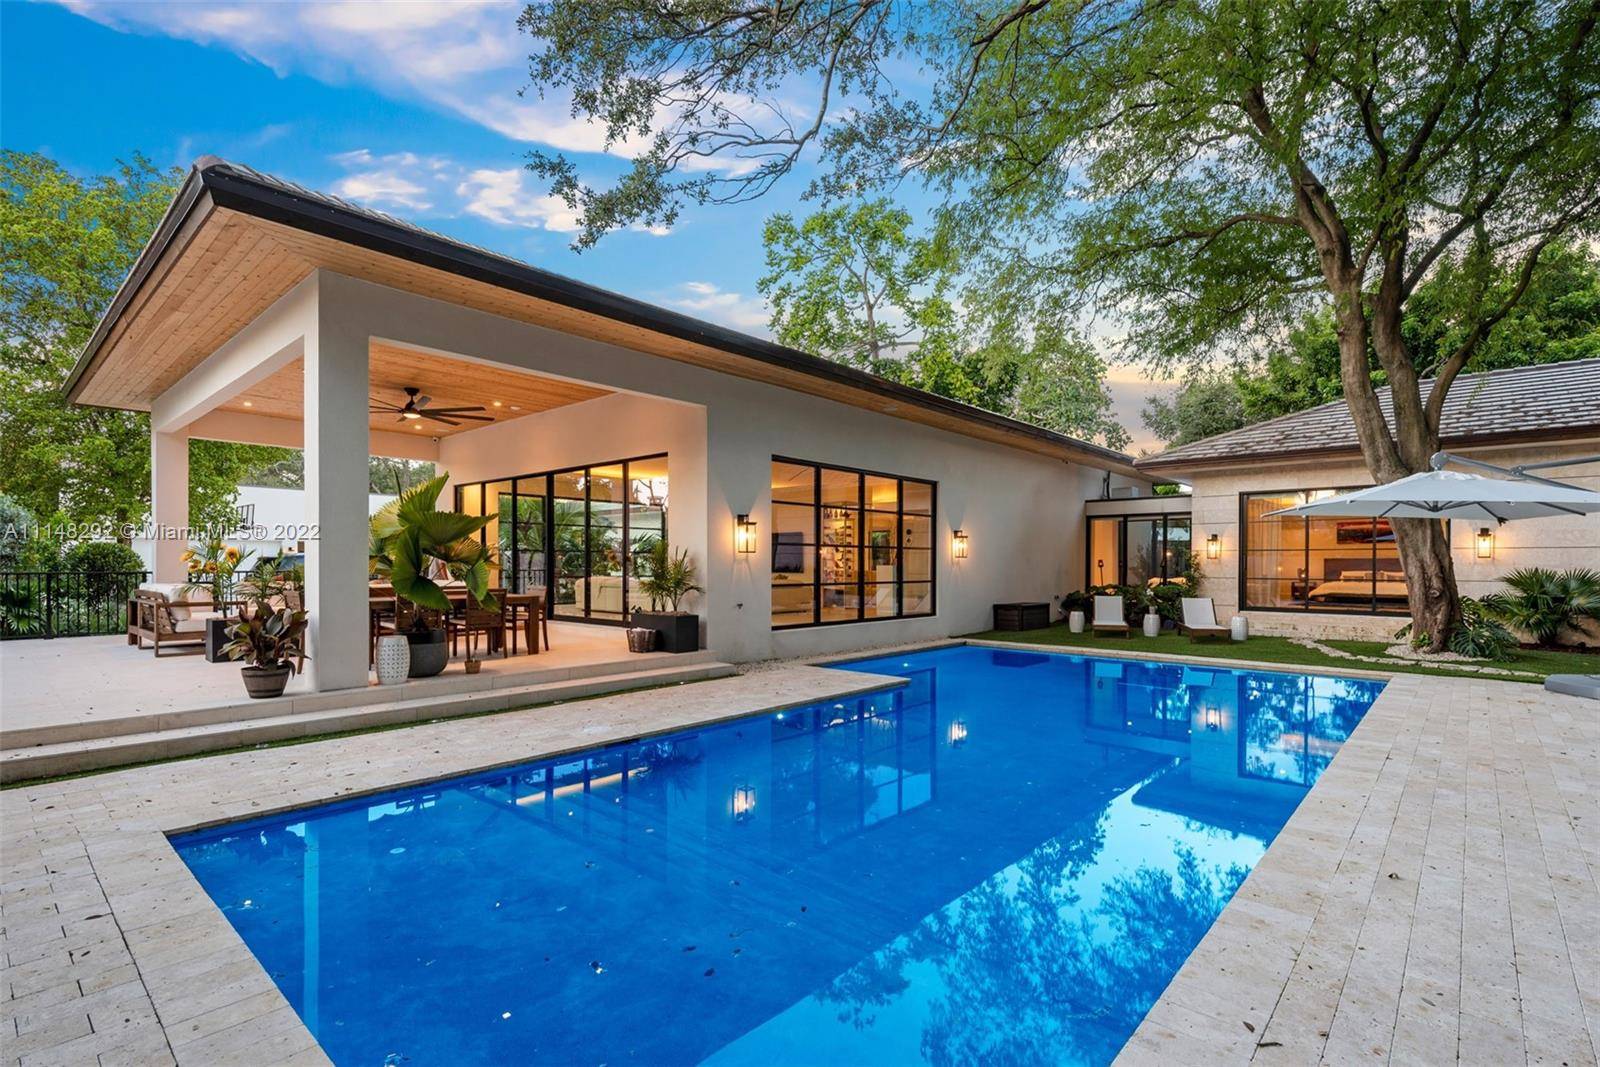 Discover this secluded Tropical style oasis in the heart of Miami.